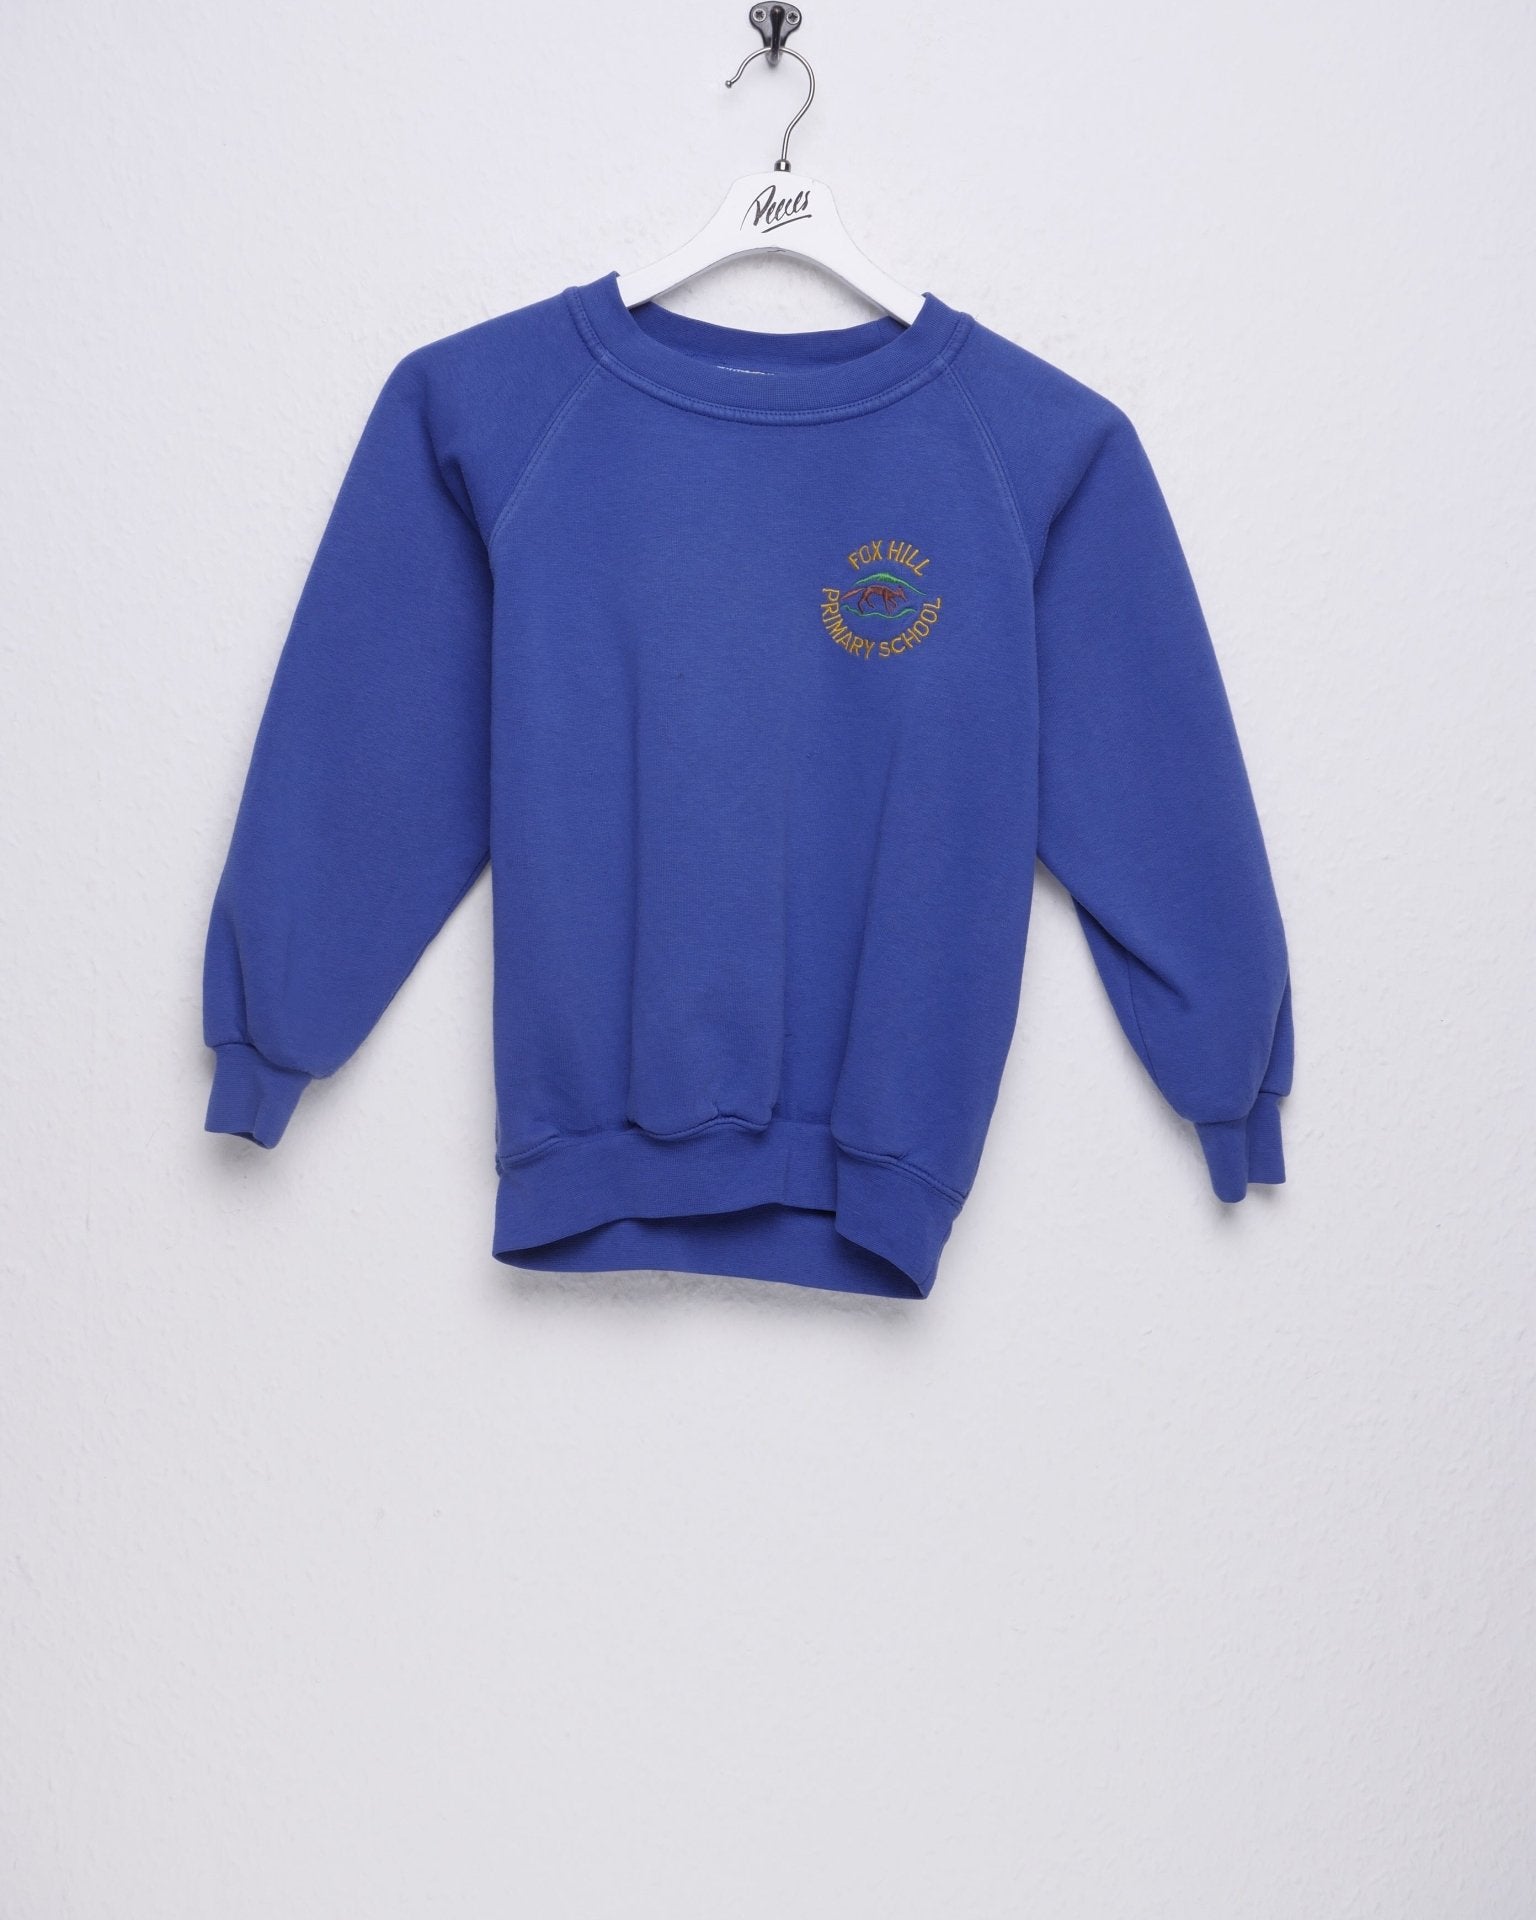 Fox Hill Primary School embroidered Logo Vintage Sweater - Peeces